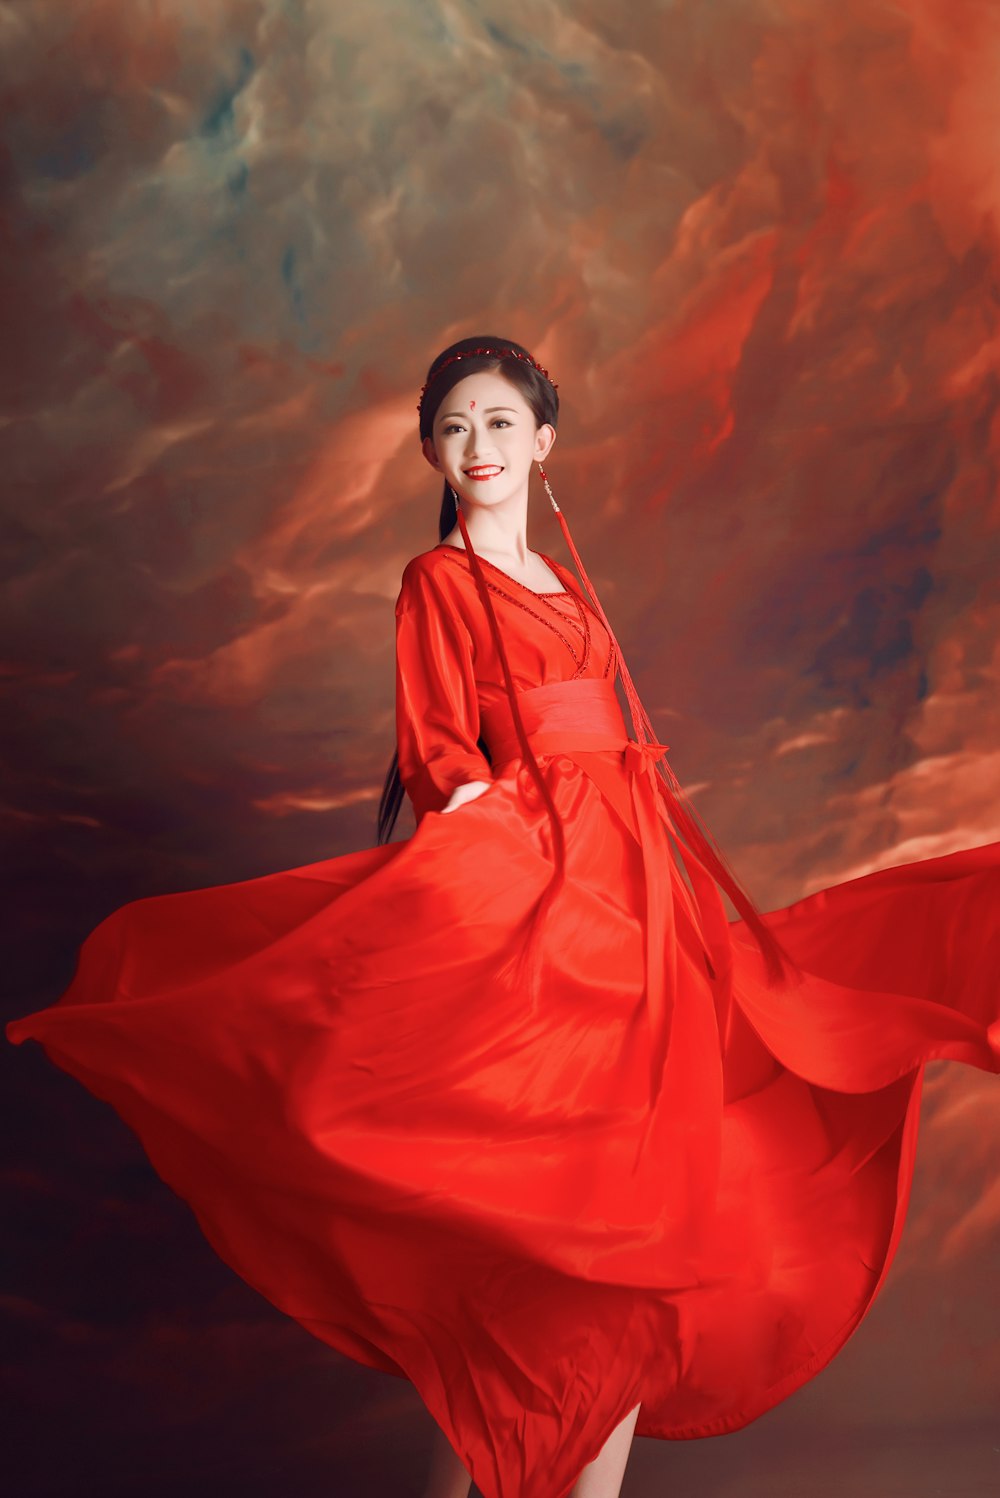 woman in red dress under blue sky during daytime